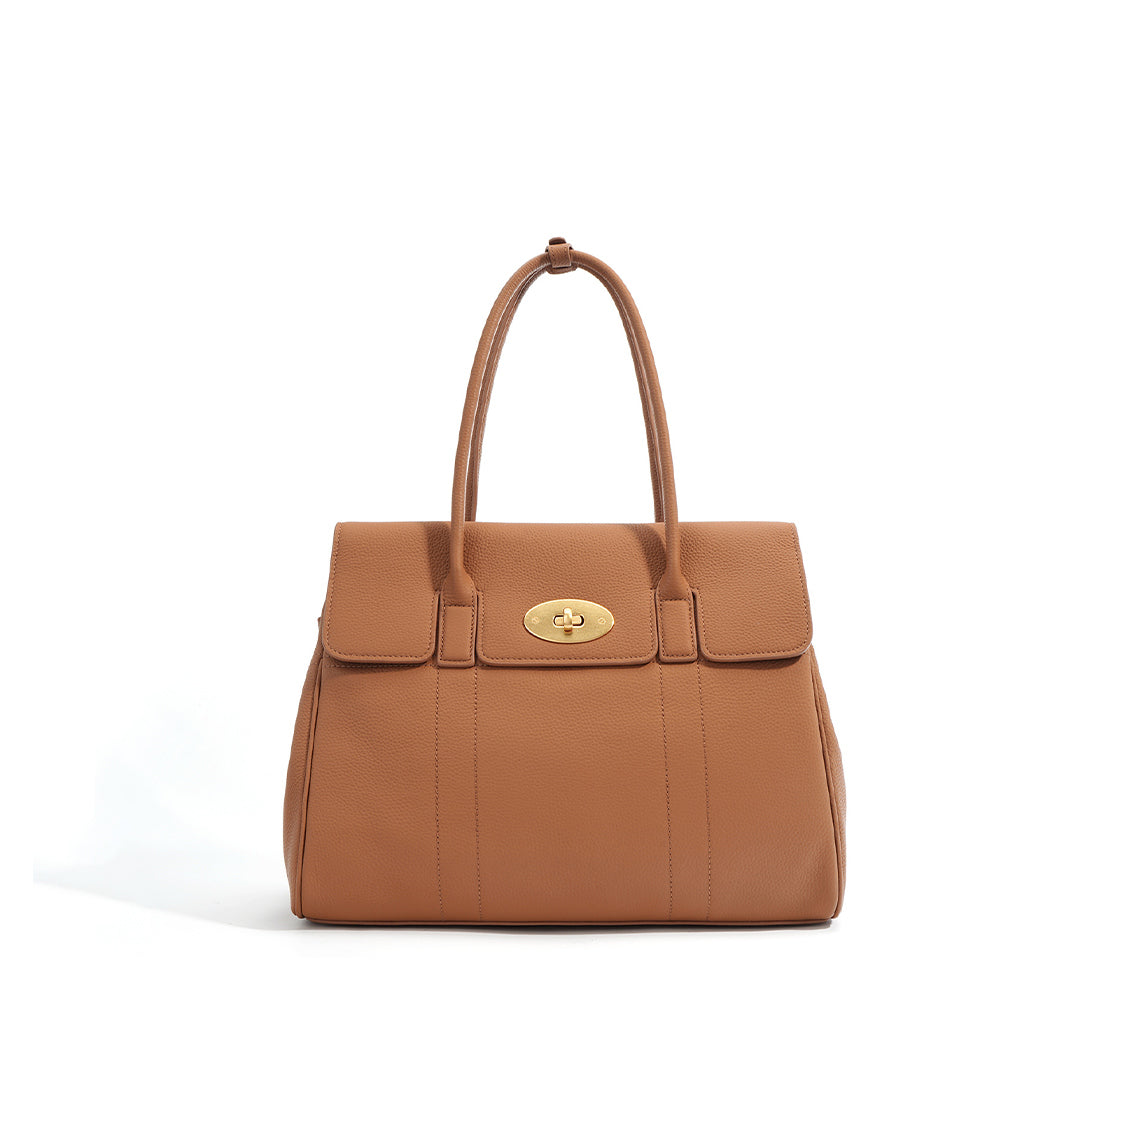 Top Grain Leather Large Handbag | Brown Leather Tote